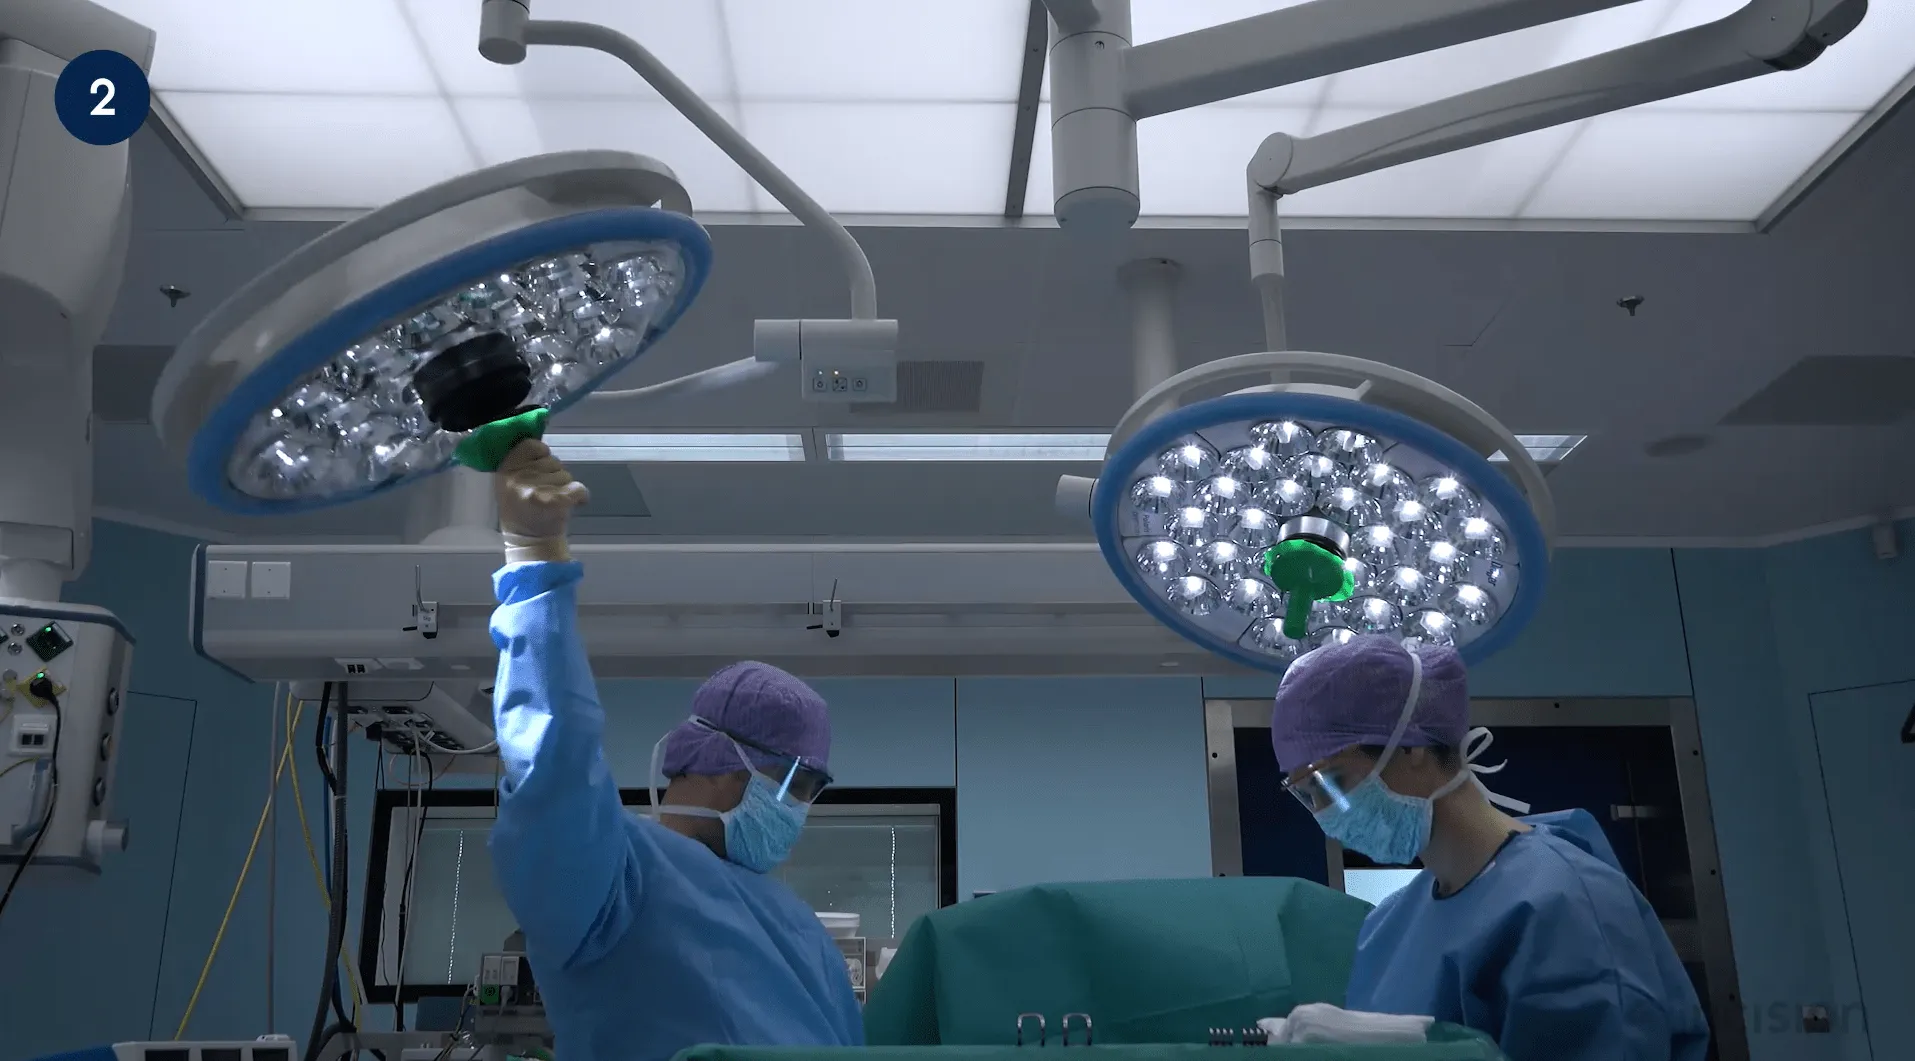 Operating room team member positions the light